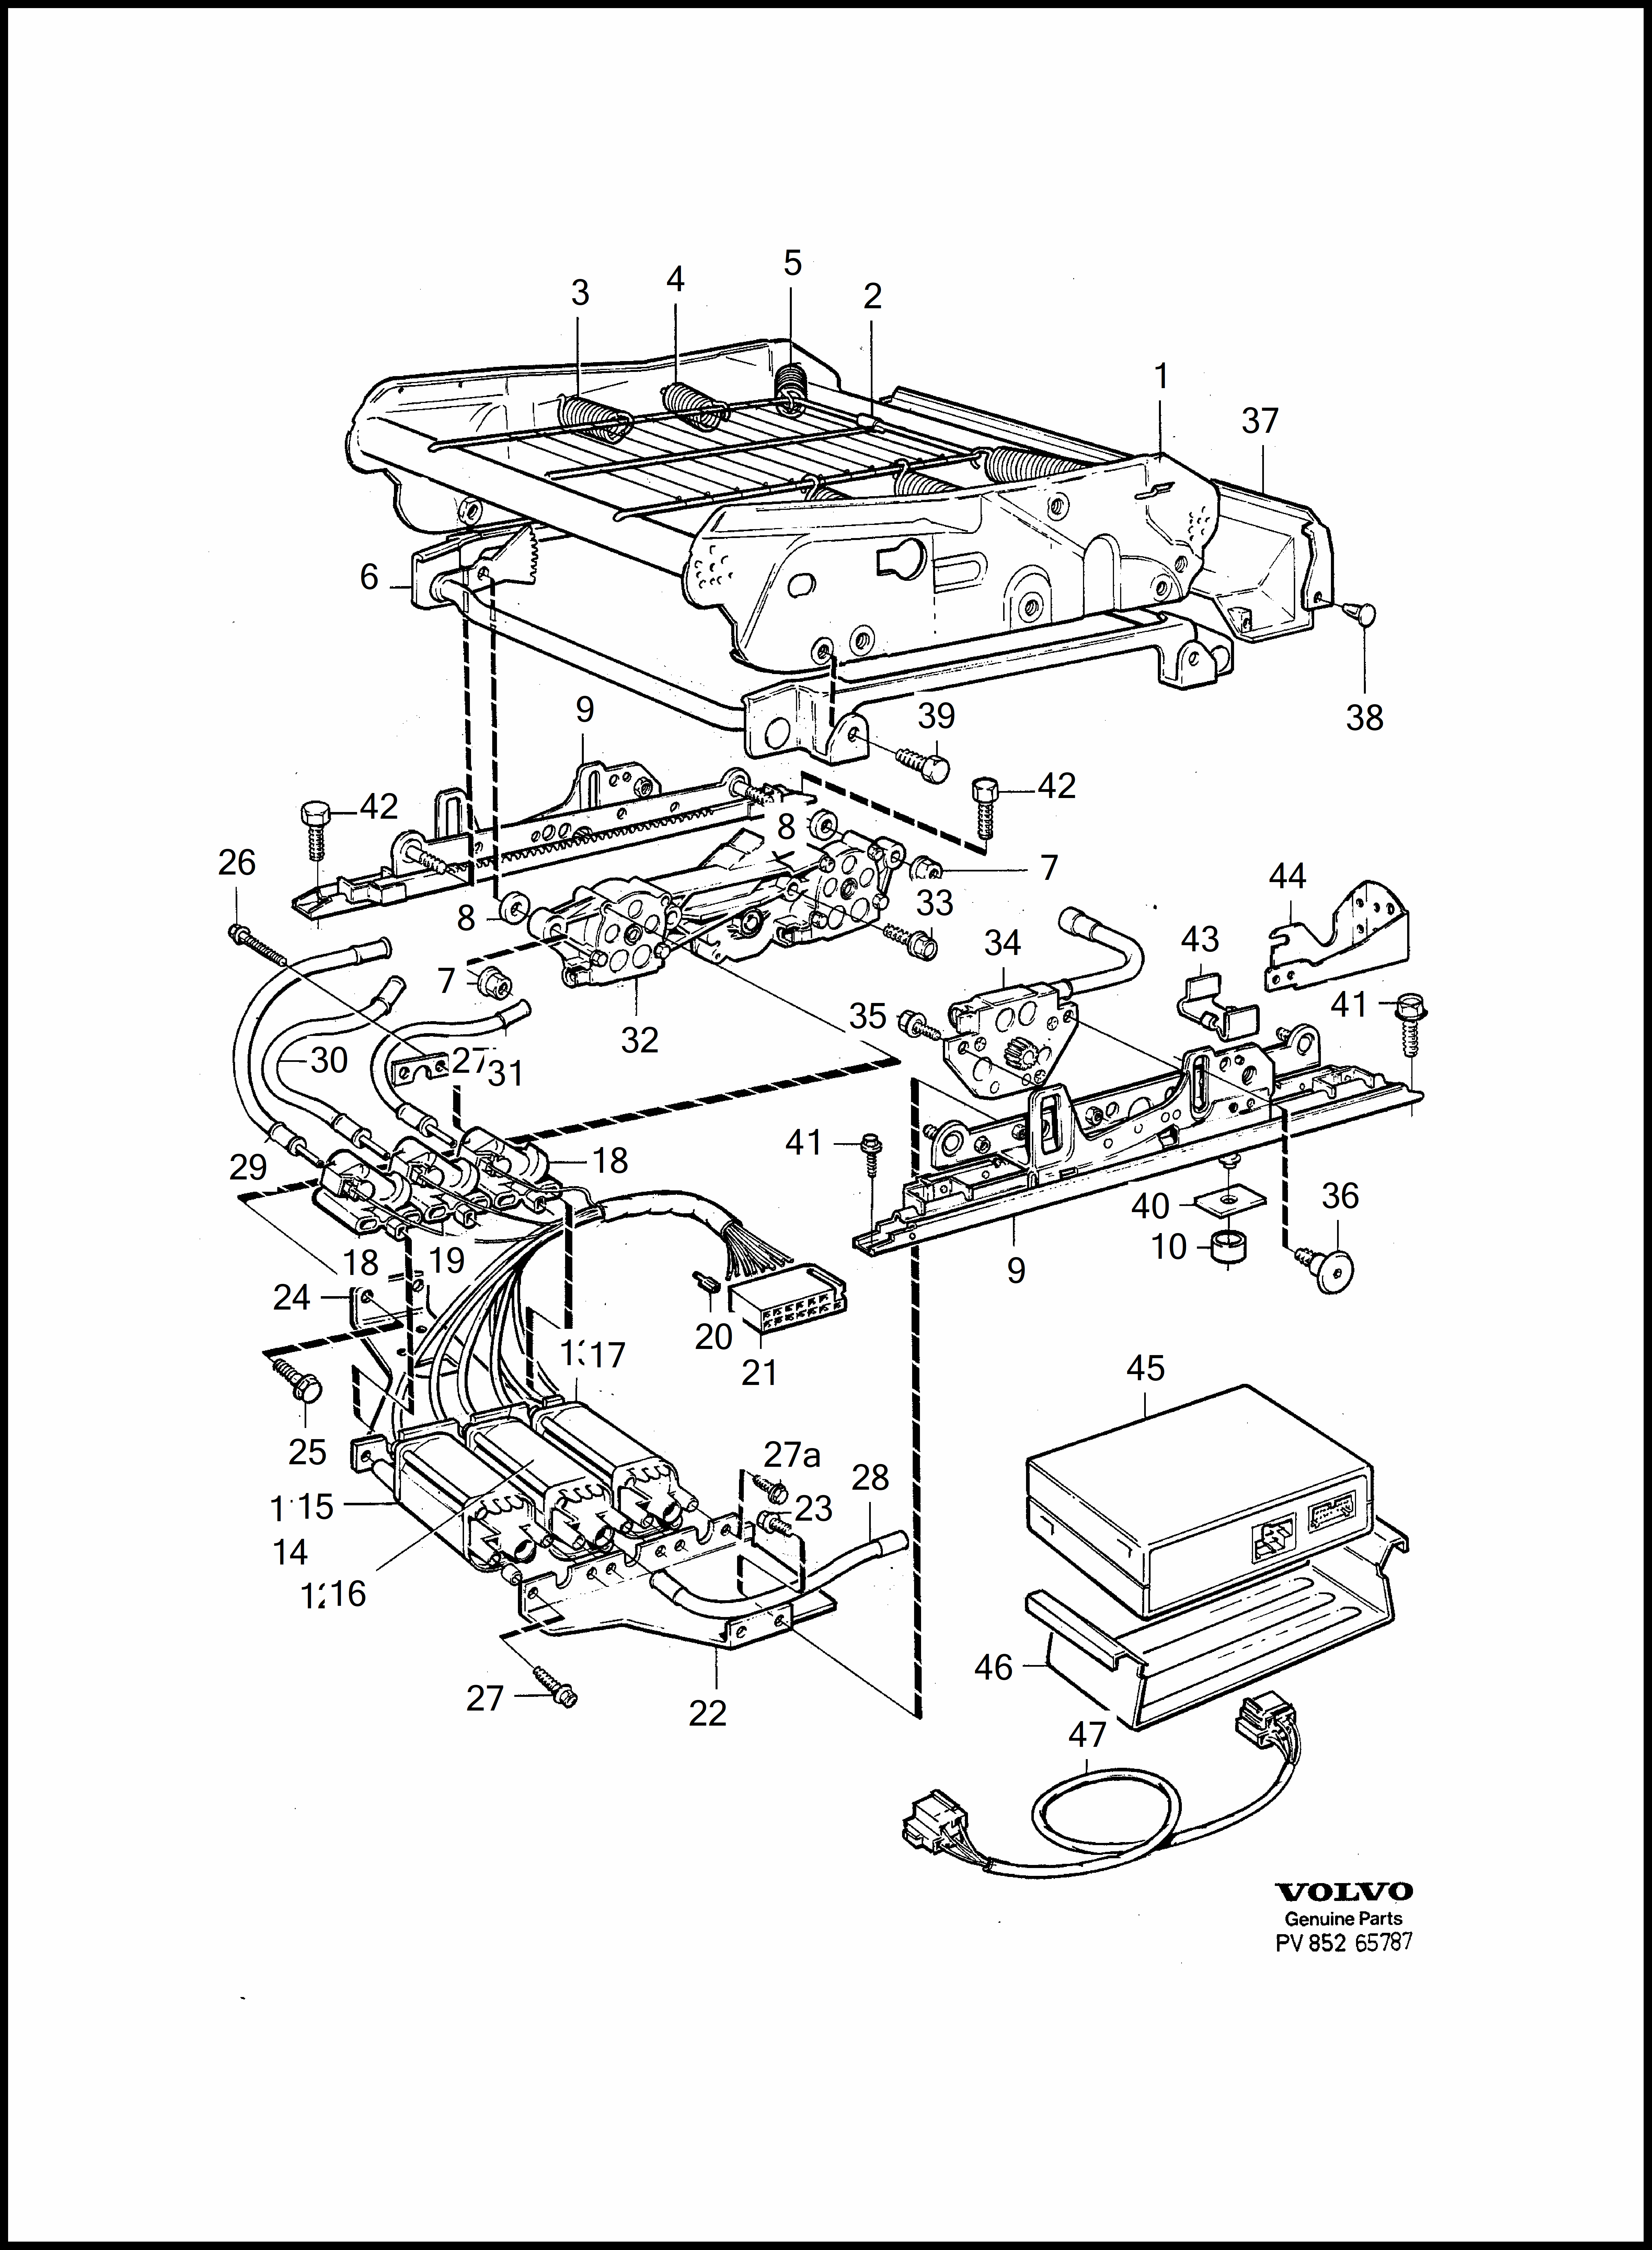 subframe for seat, electrical adjustment pour Volvo 940 940